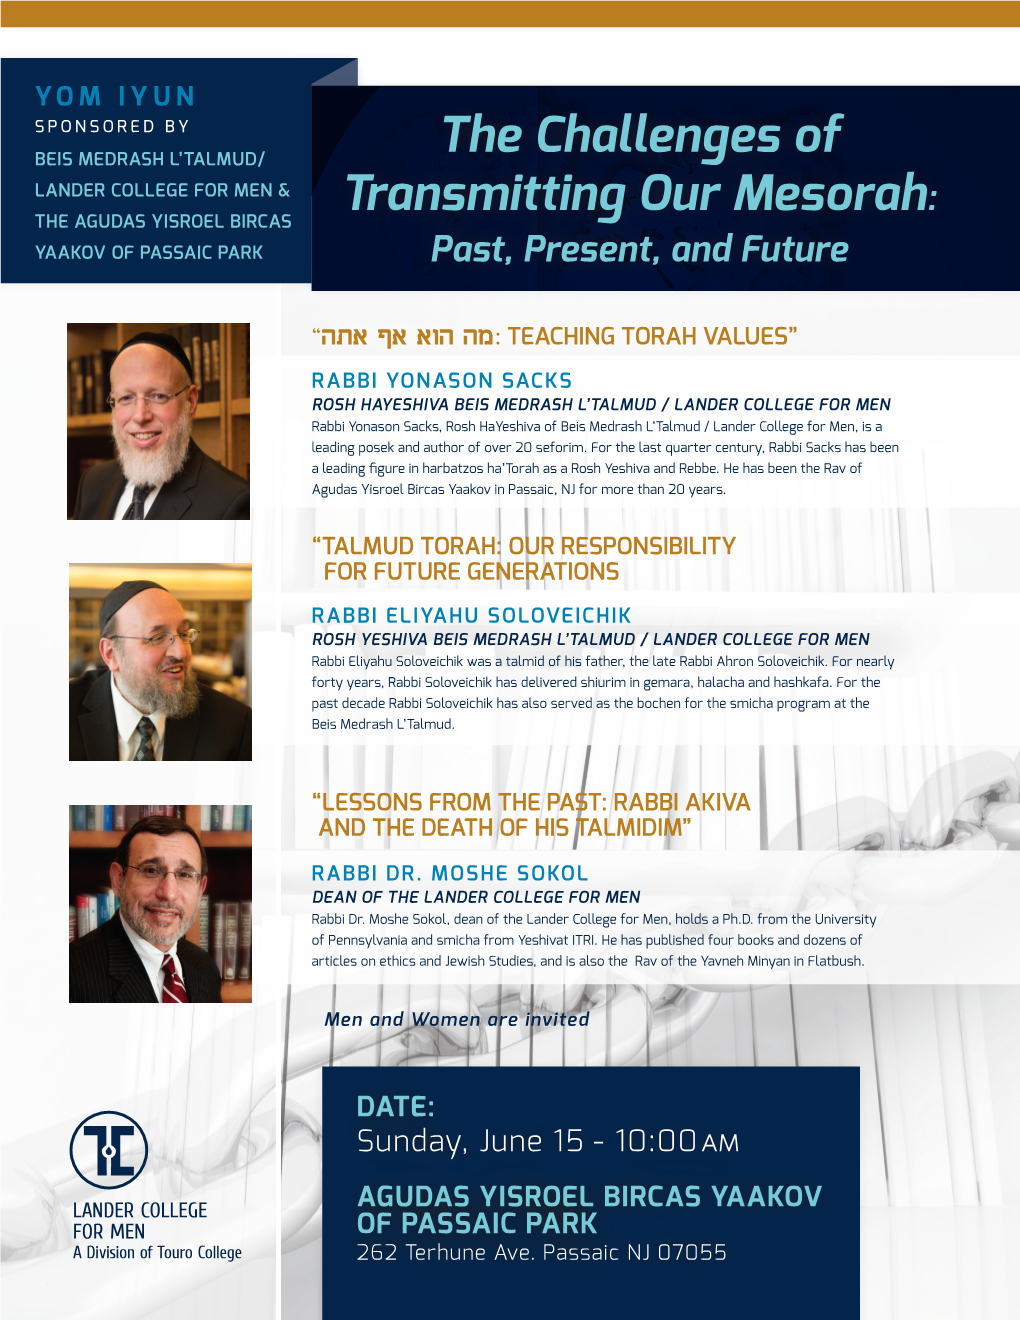 The Challenges of Transmitting Our Mesorah